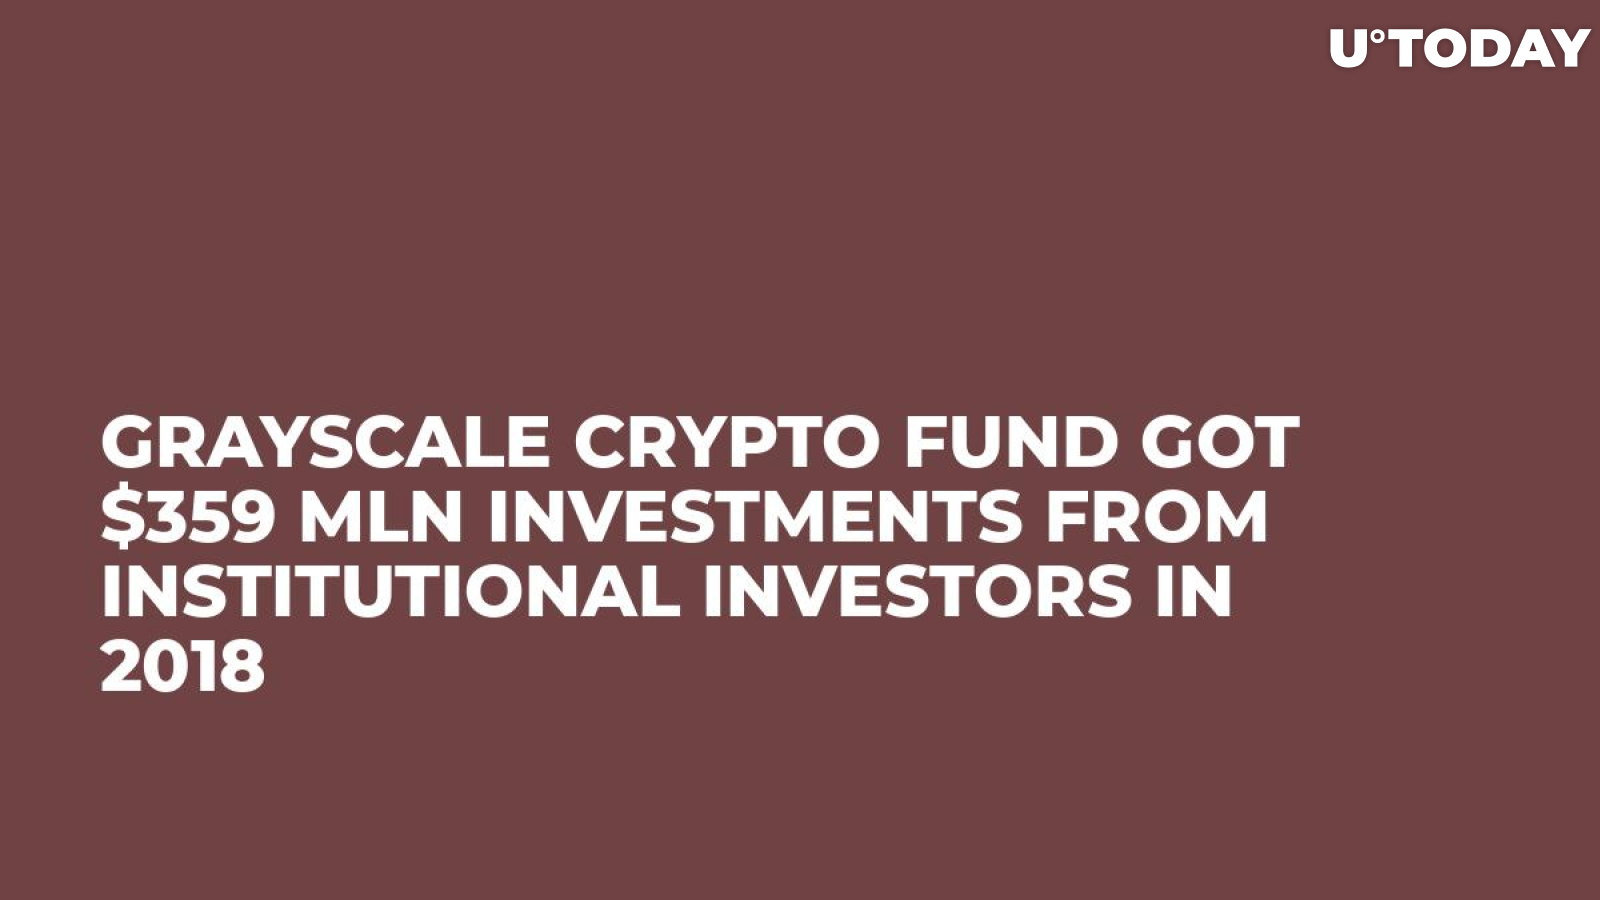 Grayscale Crypto Fund Got $359 Mln Investments from Institutional Investors in 2018